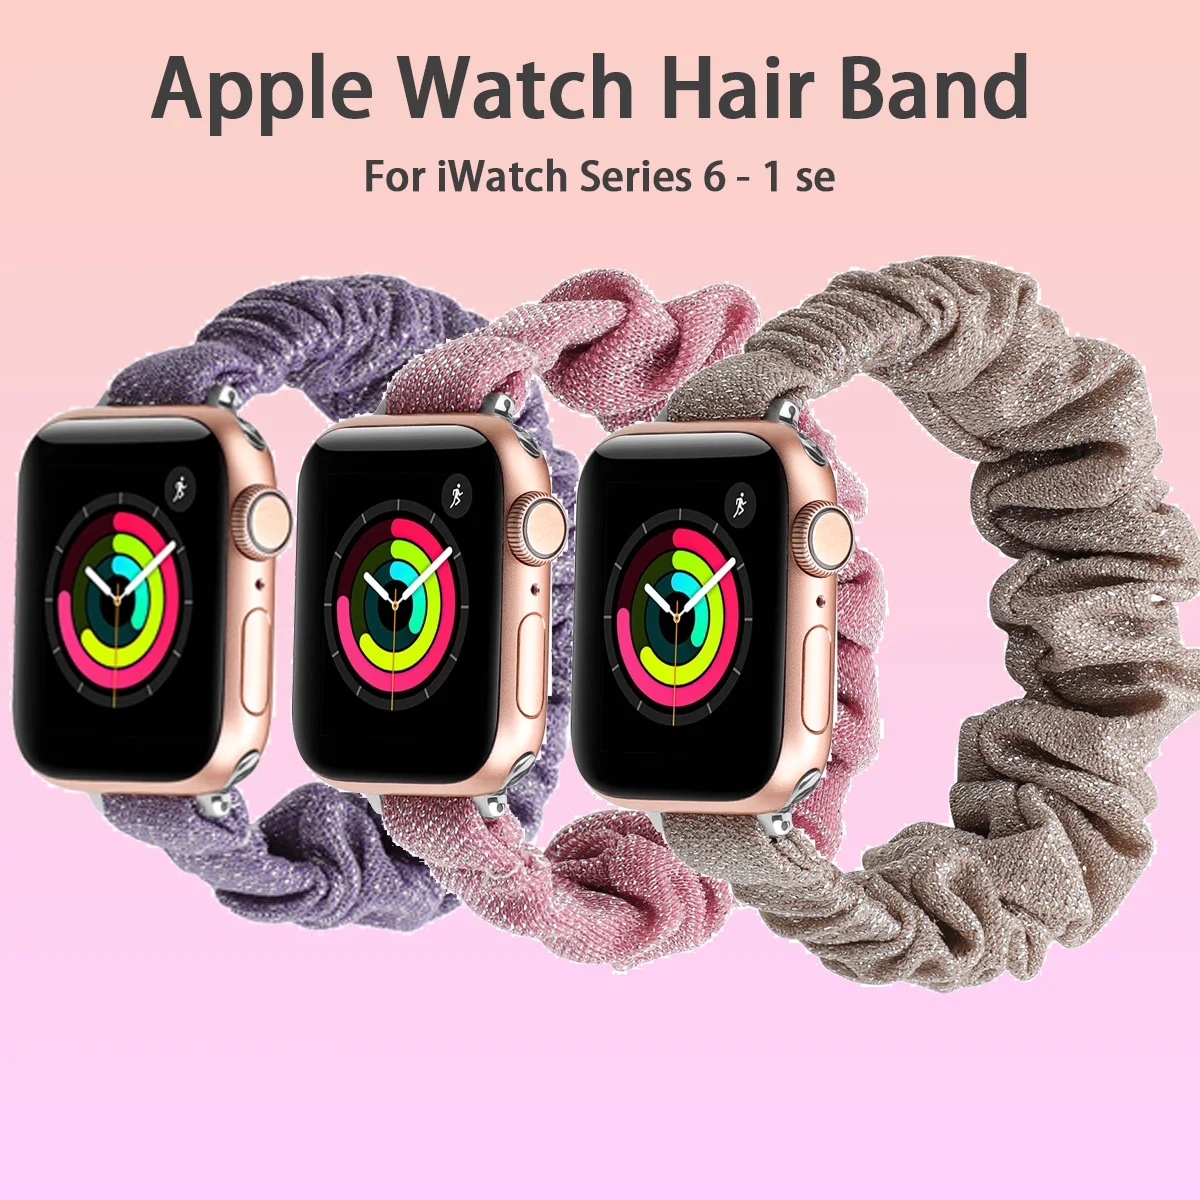 Enlarge Elastic Hair Band Strap for Apple Watch 14mm Band for Women 3-Piece Set for iWatch Bands Series 6 5 4 3 2 1 SE 44mm 40 42 38mm